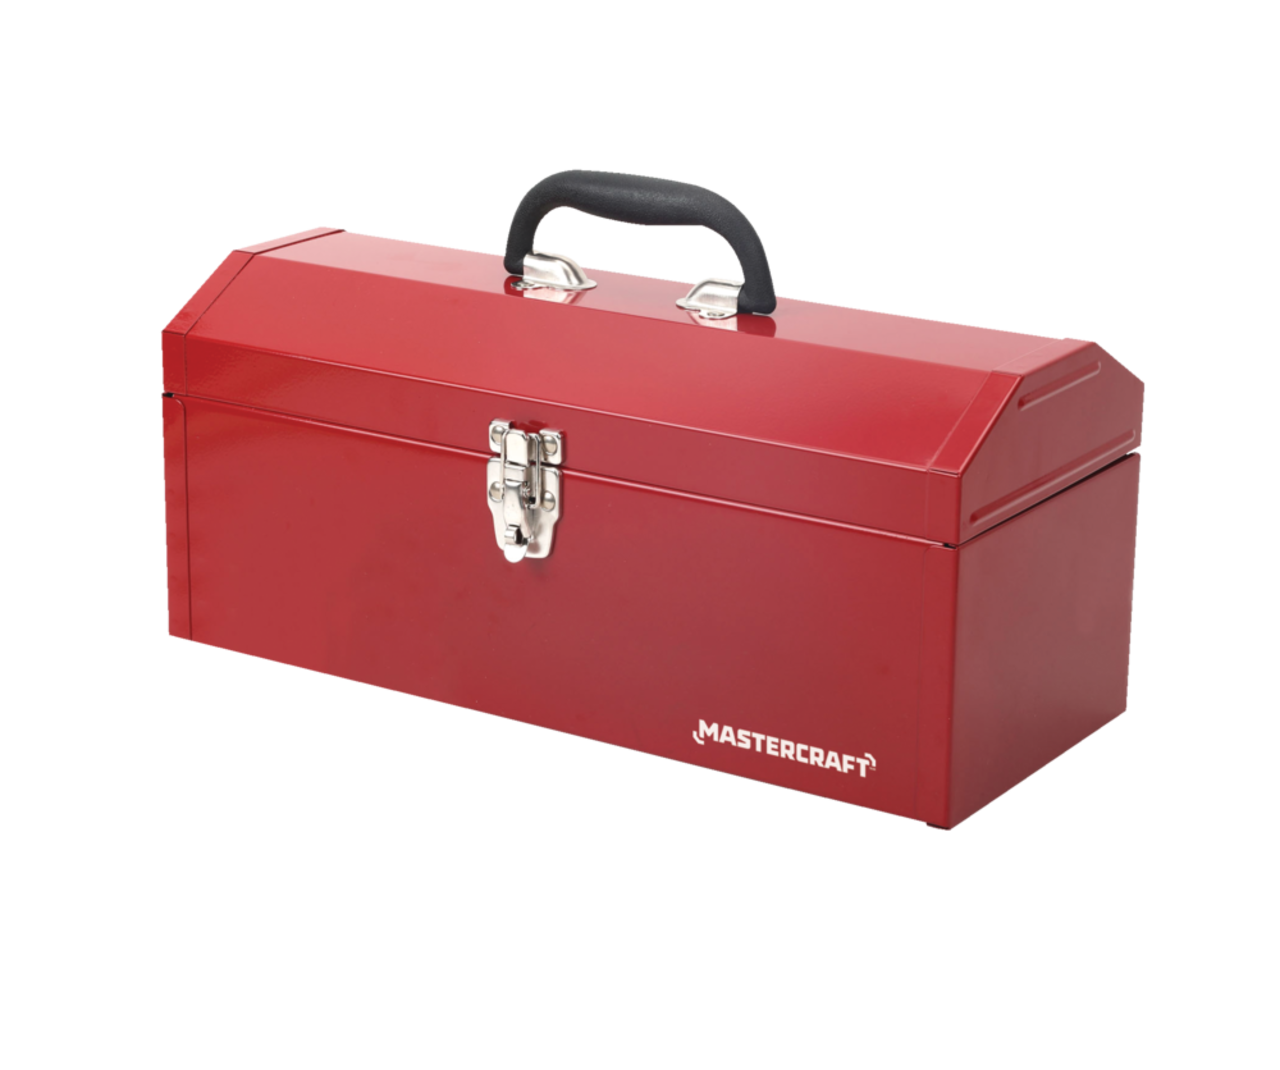 Mastercraft Portable Metal Hip Roof Tool Box w/ Removable Tray, Red, 17-in